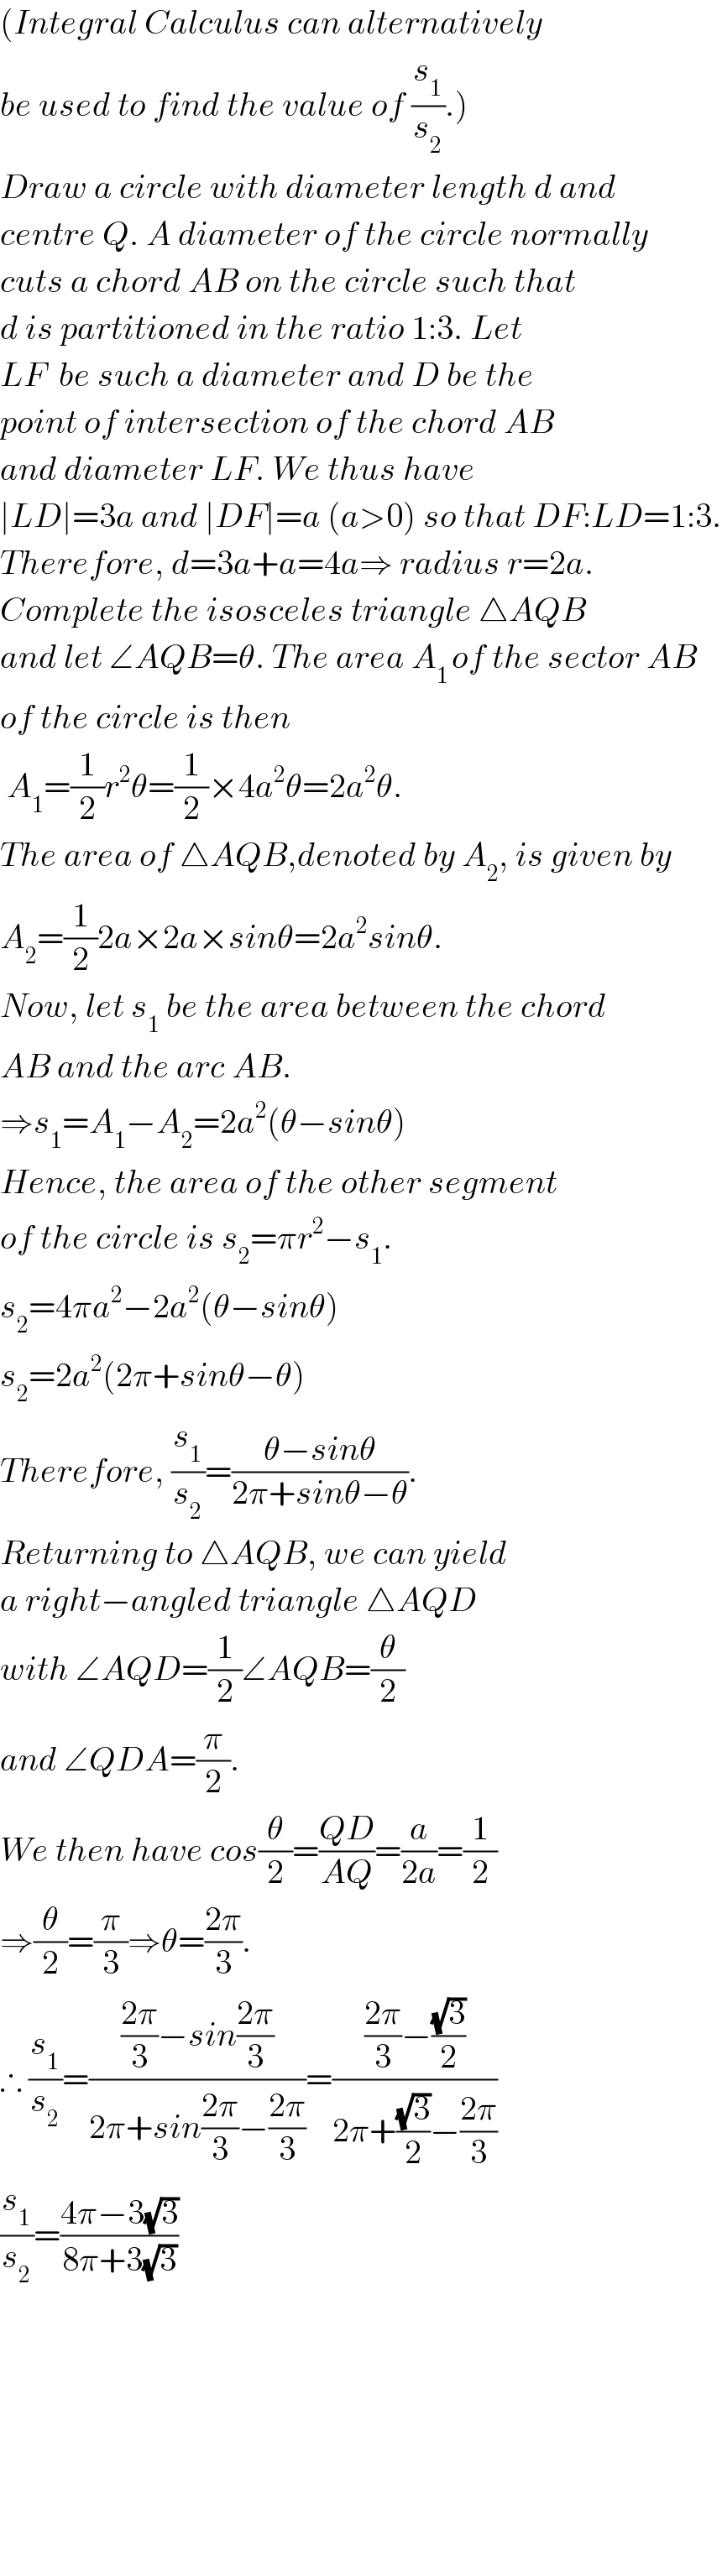 (Integral Calculus can alternatively  be used to find the value of (s_1 /s_2 ).)  Draw a circle with diameter length d and   centre Q. A diameter of the circle normally  cuts a chord AB on the circle such that  d is partitioned in the ratio 1:3. Let  LF  be such a diameter and D be the   point of intersection of the chord AB  and diameter LF. We thus have   ∣LD∣=3a and ∣DF∣=a (a>0) so that DF:LD=1:3.  Therefore, d=3a+a=4a⇒ radius r=2a.  Complete the isosceles triangle △AQB  and let ∠AQB=θ. The area A_(1 ) of the sector AB  of the circle is then   A_1 =(1/2)r^2 θ=(1/2)×4a^2 θ=2a^2 θ.  The area of △AQB,denoted by A_2 , is given by  A_2 =(1/2)2a×2a×sinθ=2a^2 sinθ.  Now, let s_1  be the area between the chord  AB and the arc AB.   ⇒s_1 =A_1 −A_2 =2a^2 (θ−sinθ)  Hence, the area of the other segment  of the circle is s_2 =πr^2 −s_1 .  s_2 =4πa^2 −2a^2 (θ−sinθ)  s_2 =2a^2 (2π+sinθ−θ)  Therefore, (s_1 /s_2 )=((θ−sinθ)/(2π+sinθ−θ)).  Returning to △AQB, we can yield  a right−angled triangle △AQD  with ∠AQD=(1/2)∠AQB=(θ/2)  and ∠QDA=(π/2).  We then have cos(θ/2)=((QD)/(AQ))=(a/(2a))=(1/2)  ⇒(θ/2)=(π/3)⇒θ=((2π)/3).  ∴ (s_1 /s_2 )=((((2π)/3)−sin((2π)/3))/(2π+sin((2π)/3)−((2π)/3)))=((((2π)/3)−((√3)/2))/(2π+((√3)/2)−((2π)/3)))  (s_1 /s_2 )=((4π−3(√3))/(8π+3(√3)))              